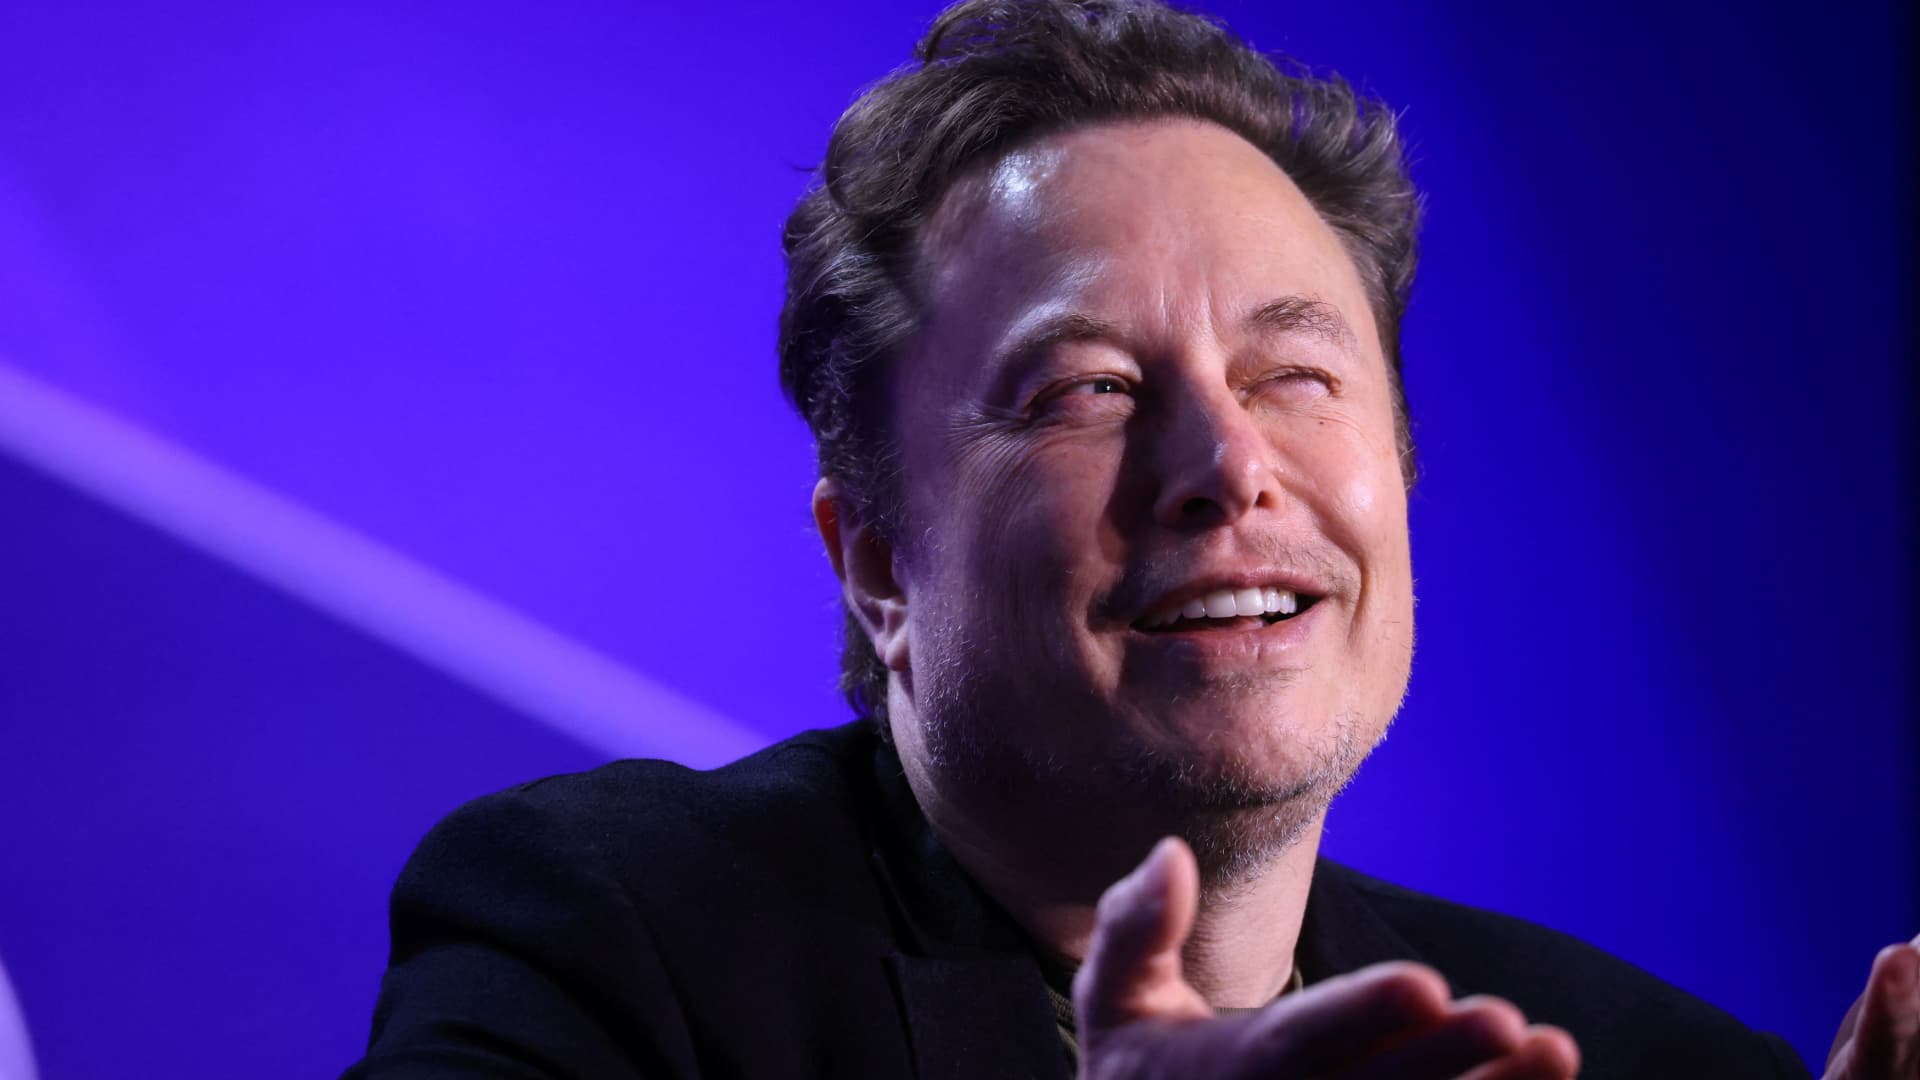 Should Elon Musk be paid $56 billion?  Tesla shareholders are allowed to vote